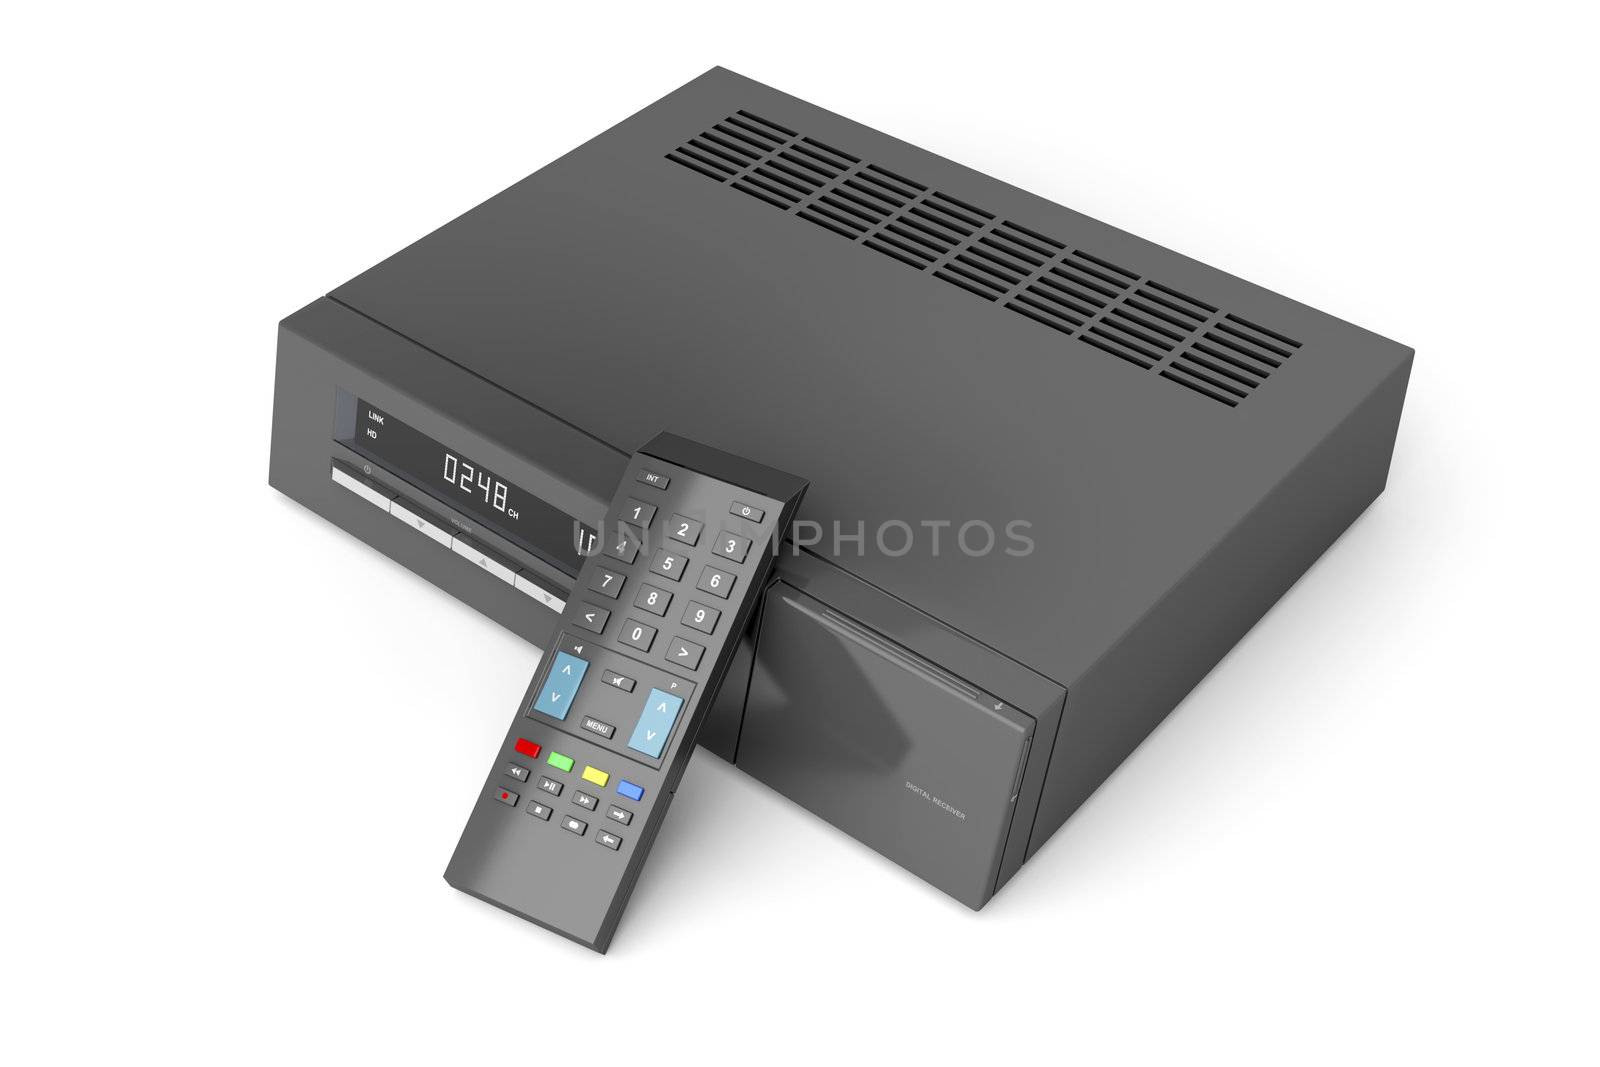 Digital receiver with remote control by magraphics